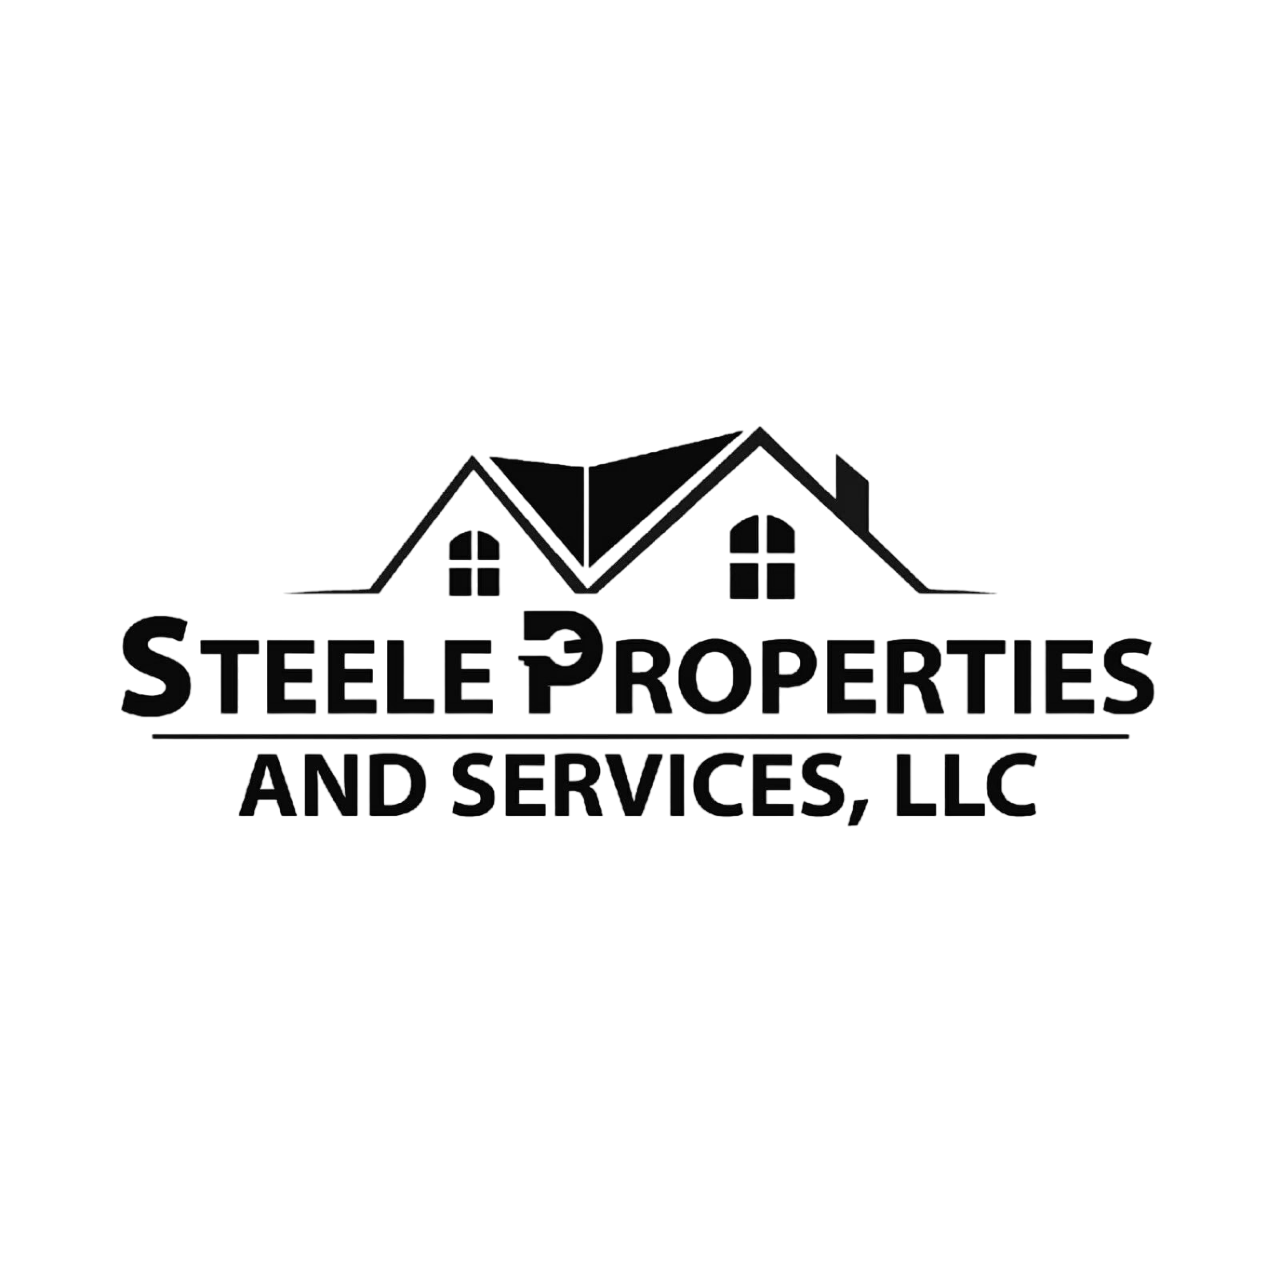 Steele Properties and Services, LLC - Lawrenceburg, IN 47025 - (513)546-9454 | ShowMeLocal.com